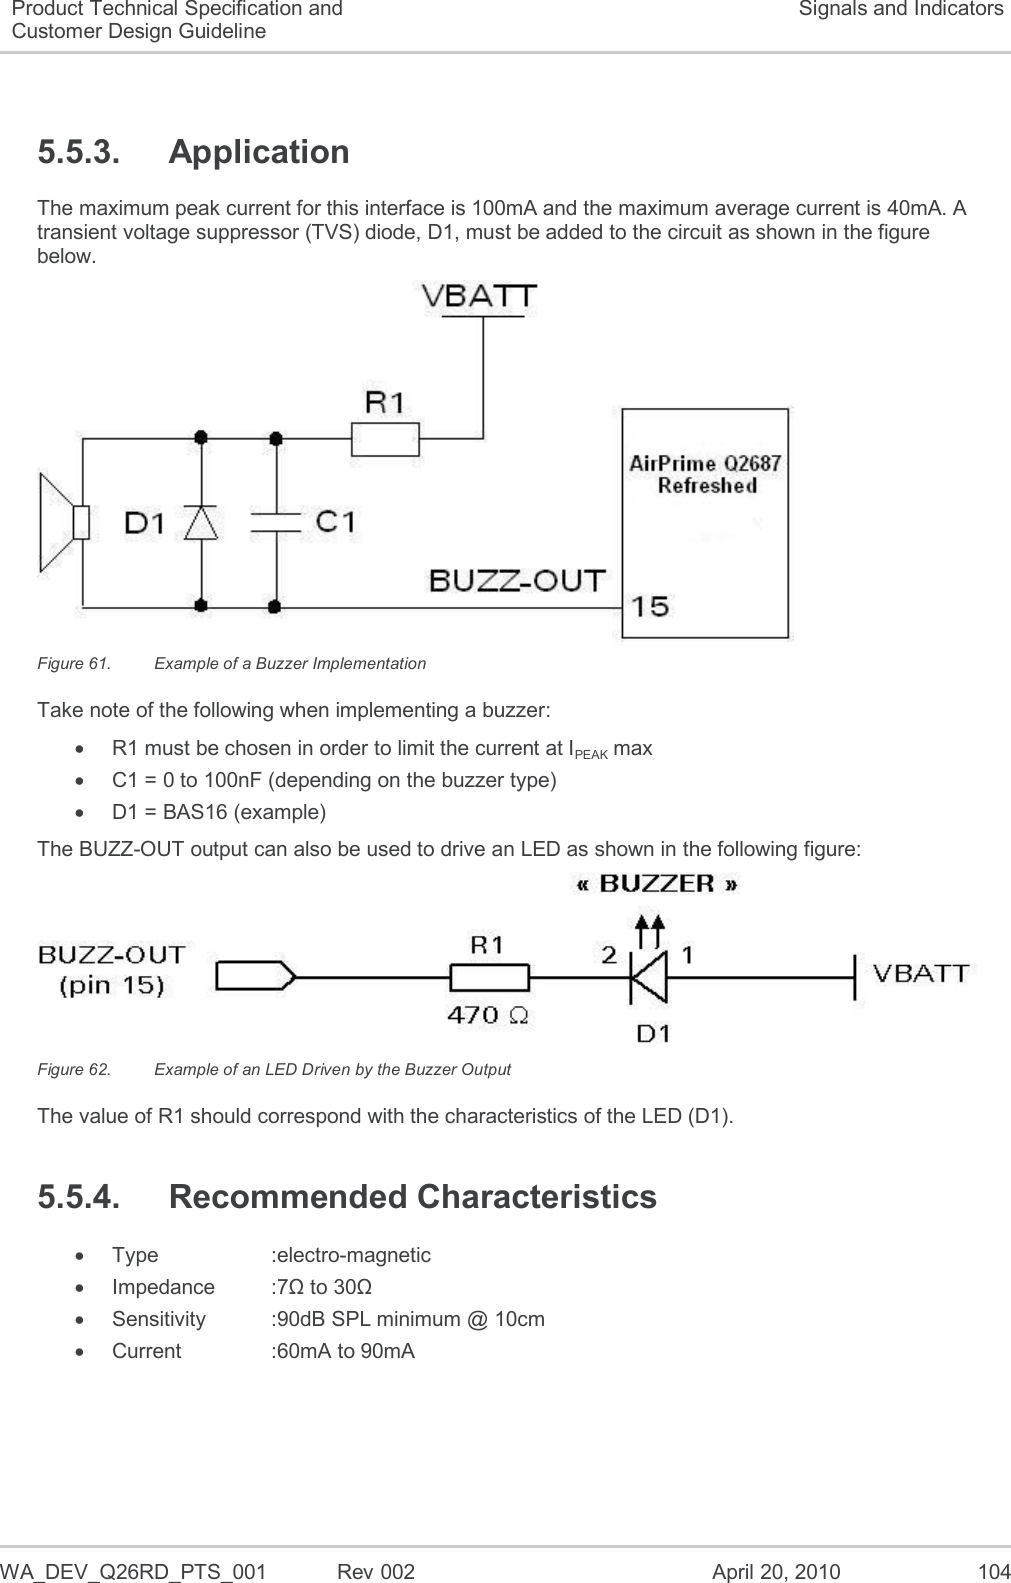   WA_DEV_Q26RD_PTS_001  Rev 002  April 20, 2010 104 Product Technical Specification and Customer Design Guideline Signals and Indicators 5.5.3.  Application The maximum peak current for this interface is 100mA and the maximum average current is 40mA. A transient voltage suppressor (TVS) diode, D1, must be added to the circuit as shown in the figure below.  Figure 61.  Example of a Buzzer Implementation Take note of the following when implementing a buzzer:   R1 must be chosen in order to limit the current at IPEAK max   C1 = 0 to 100nF (depending on the buzzer type)   D1 = BAS16 (example) The BUZZ-OUT output can also be used to drive an LED as shown in the following figure:  Figure 62.  Example of an LED Driven by the Buzzer Output The value of R1 should correspond with the characteristics of the LED (D1). 5.5.4.  Recommended Characteristics   Type    :electro-magnetic   Impedance  :7Ω to 30Ω   Sensitivity   :90dB SPL minimum @ 10cm   Current    :60mA to 90mA 